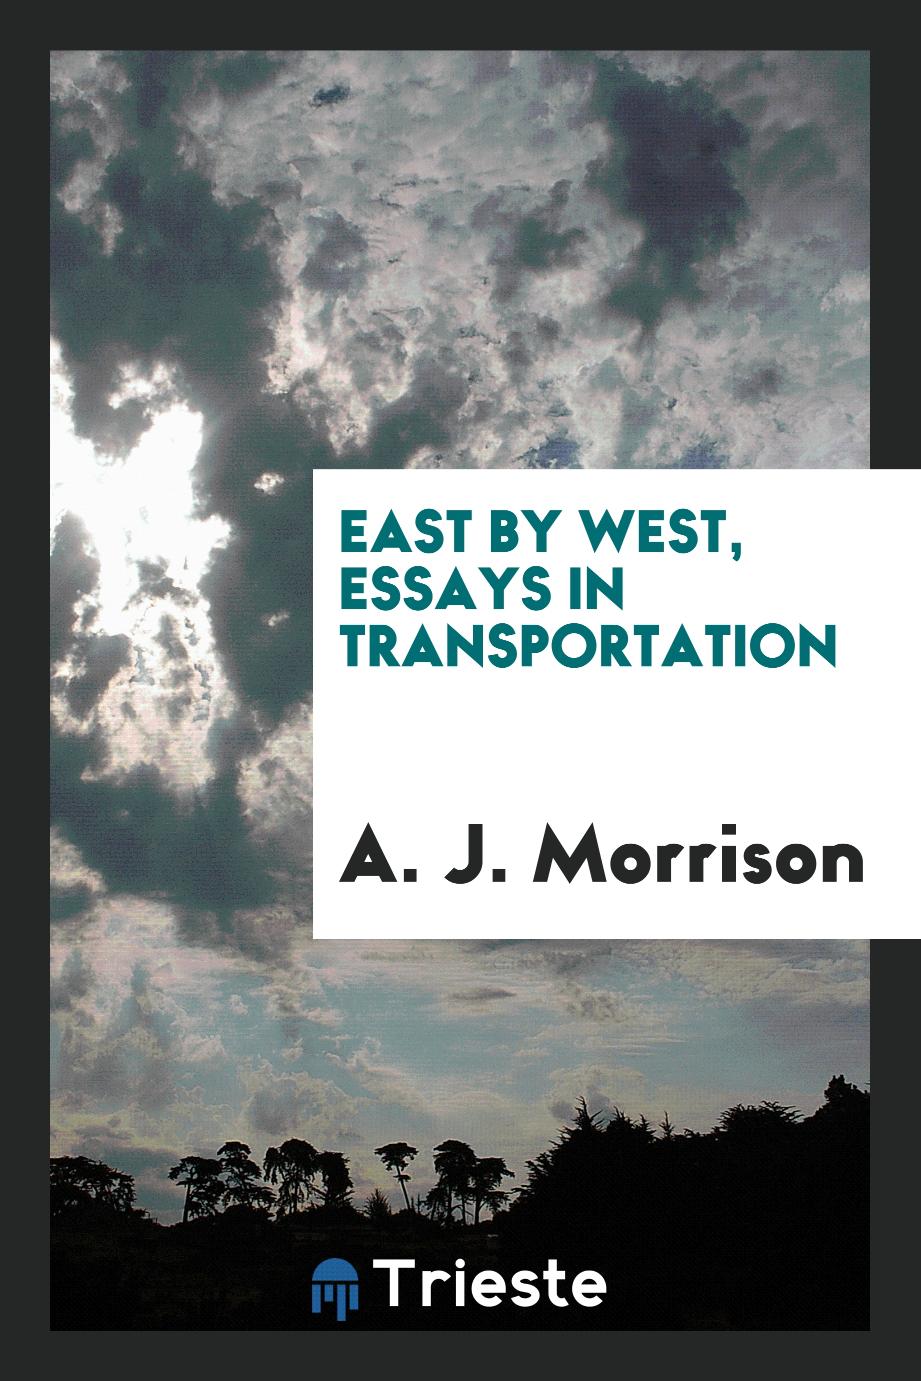 East by West, Essays in Transportation